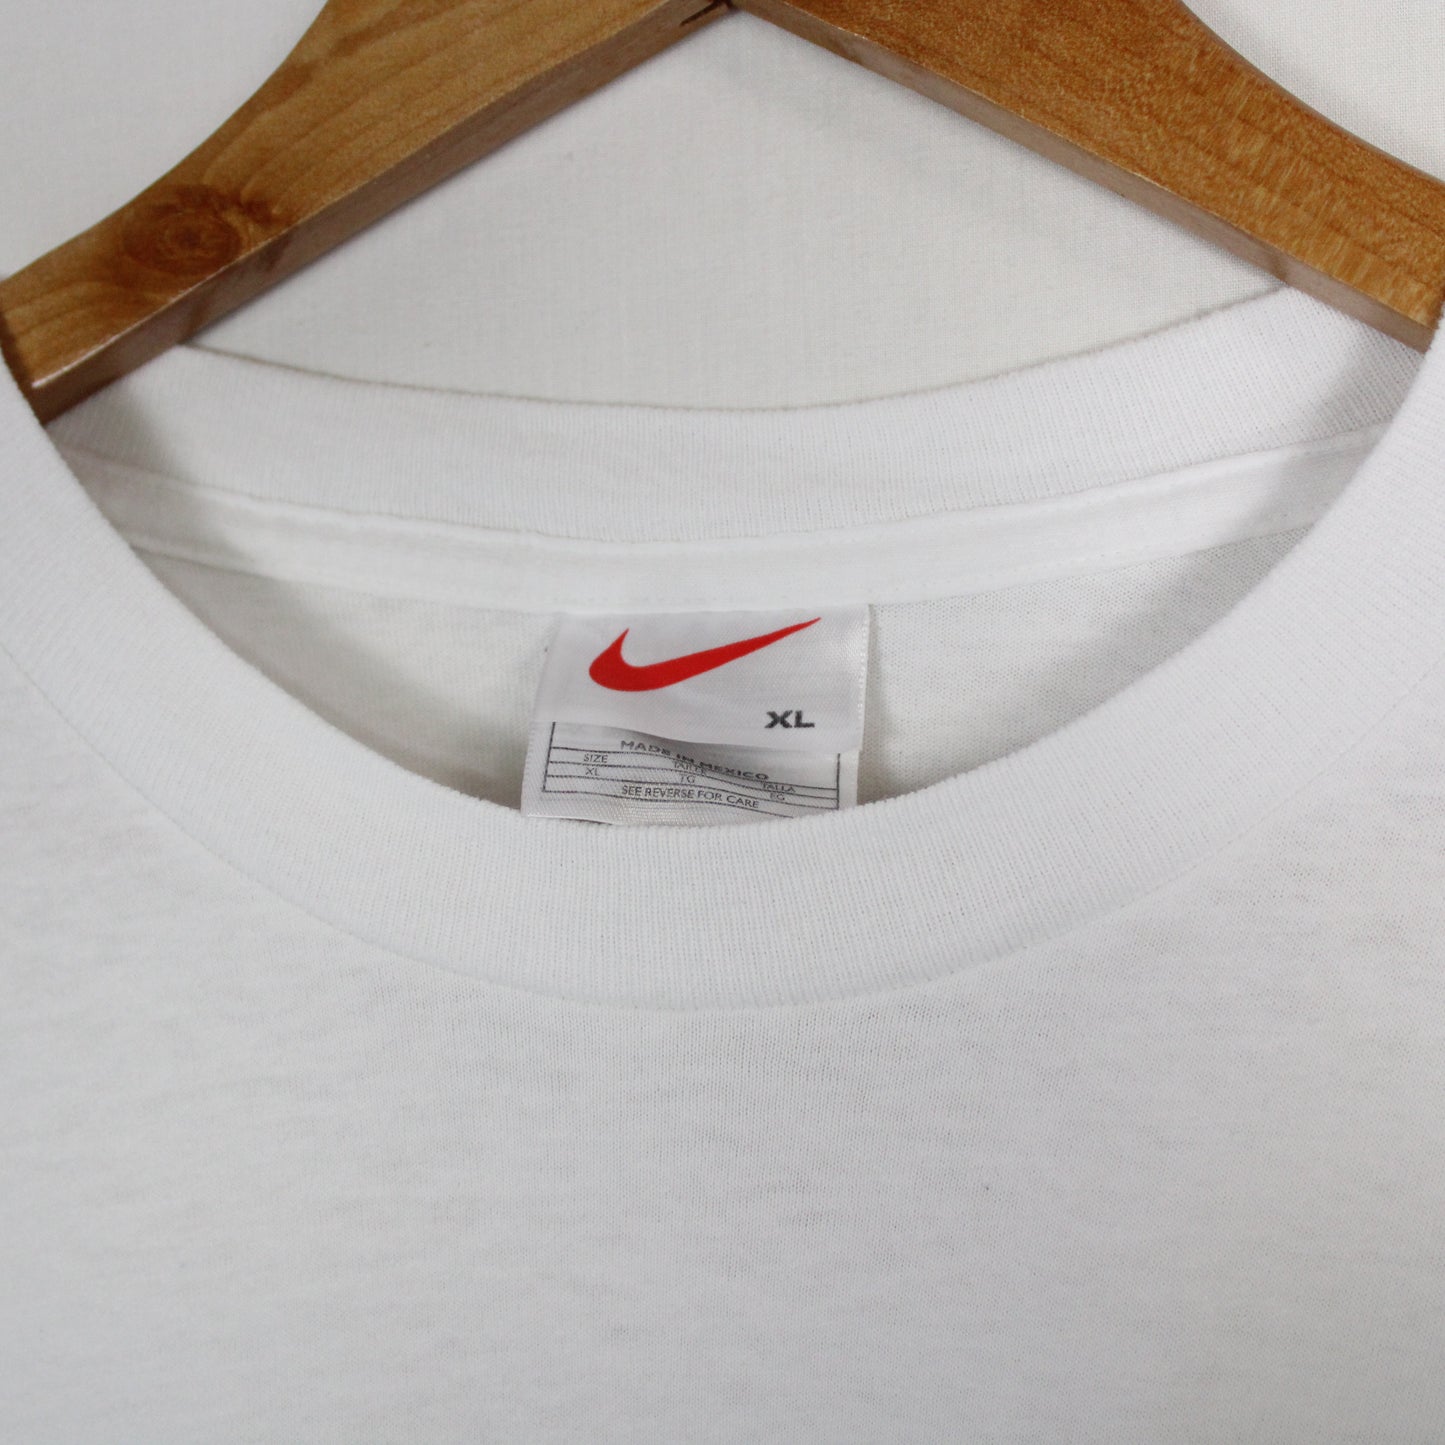 Vintage 90's Nike Just Do It Graphic Tee - XL